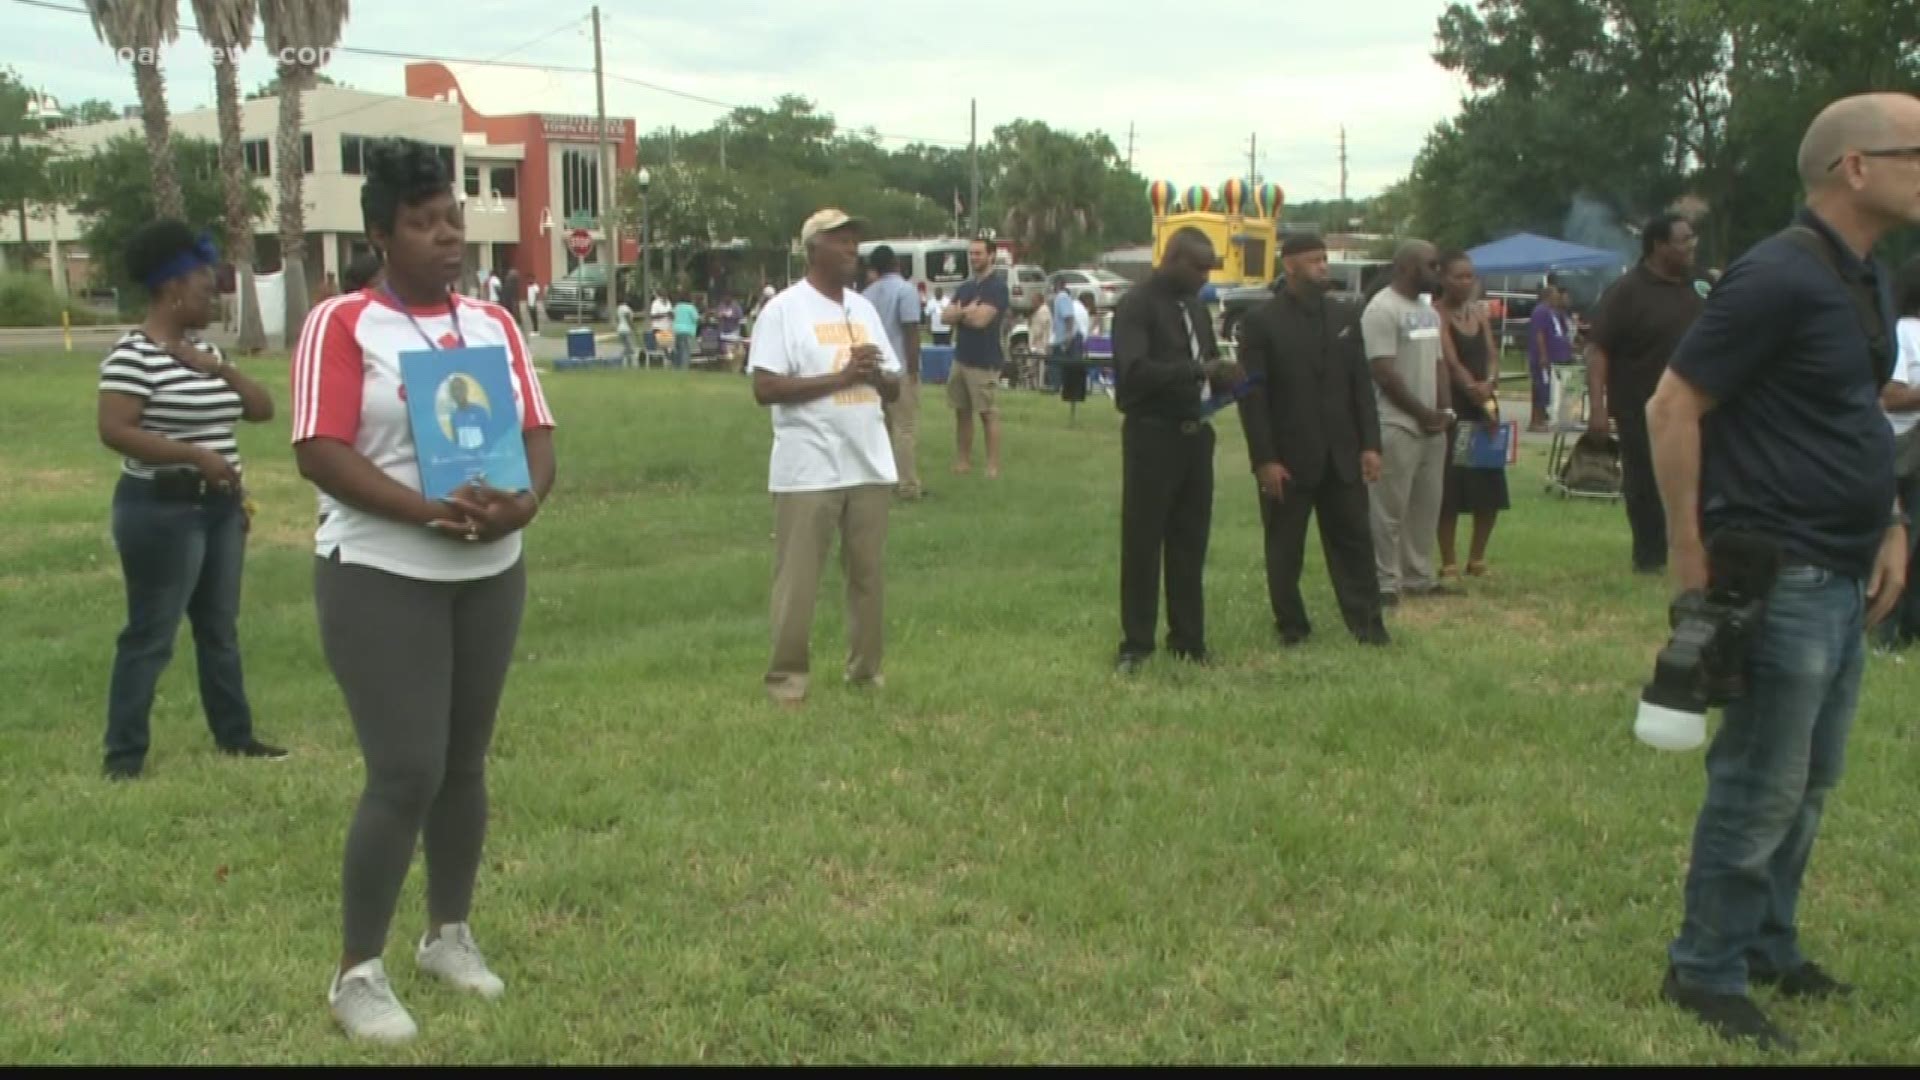 Since the June 8 Cure the Violence kickoff, 11 lives were taken in Jacksonville.